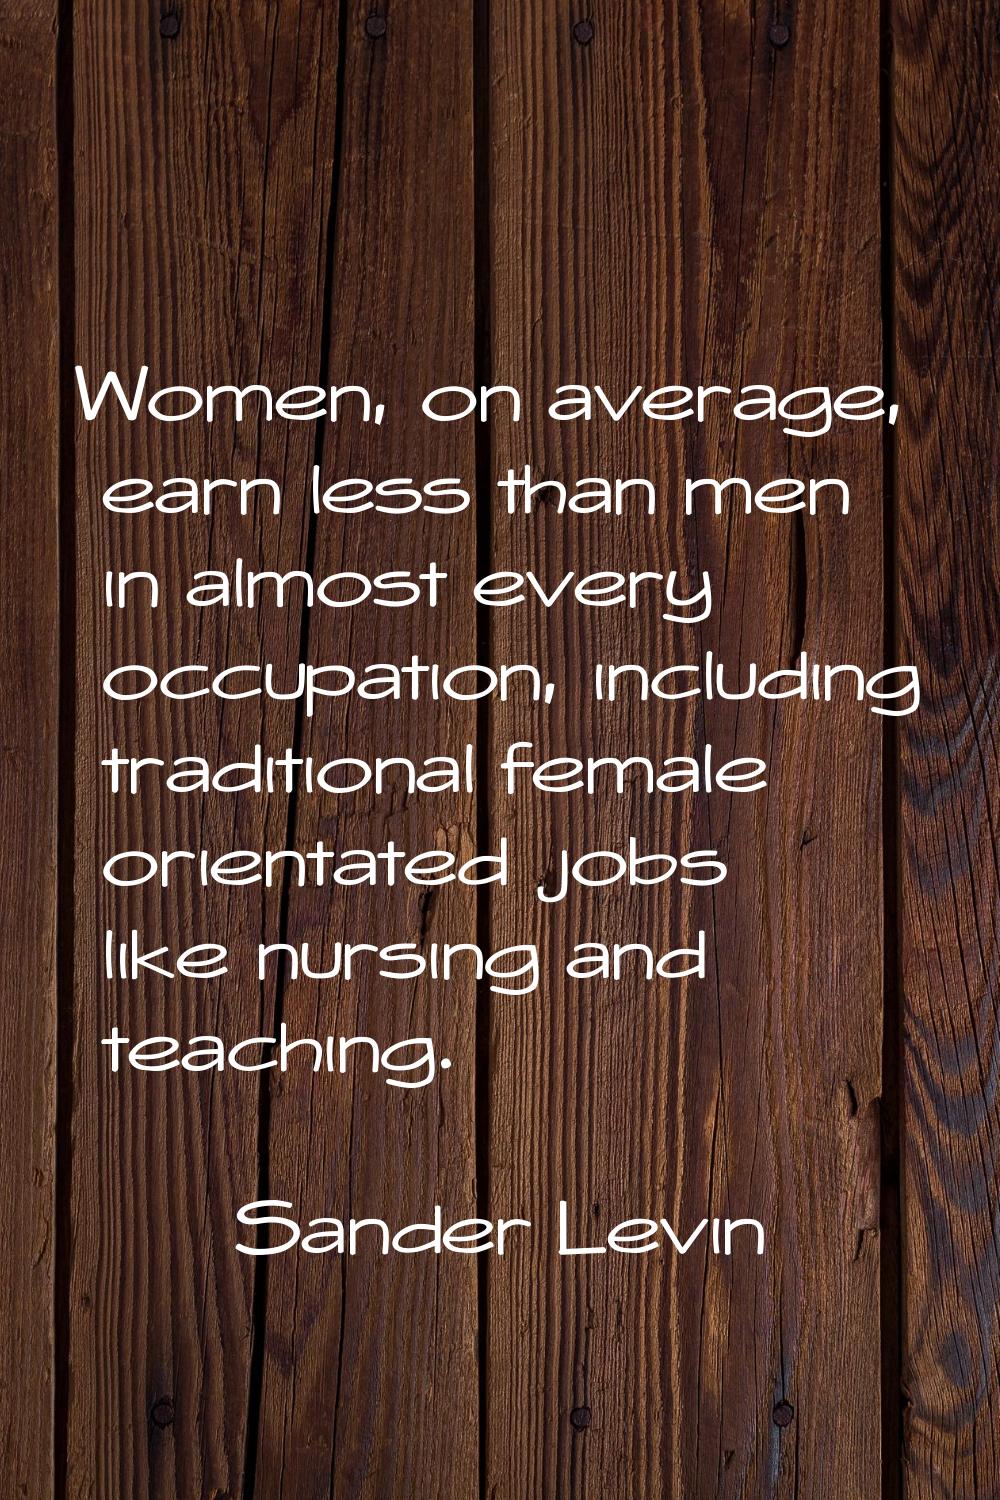 Women, on average, earn less than men in almost every occupation, including traditional female orie